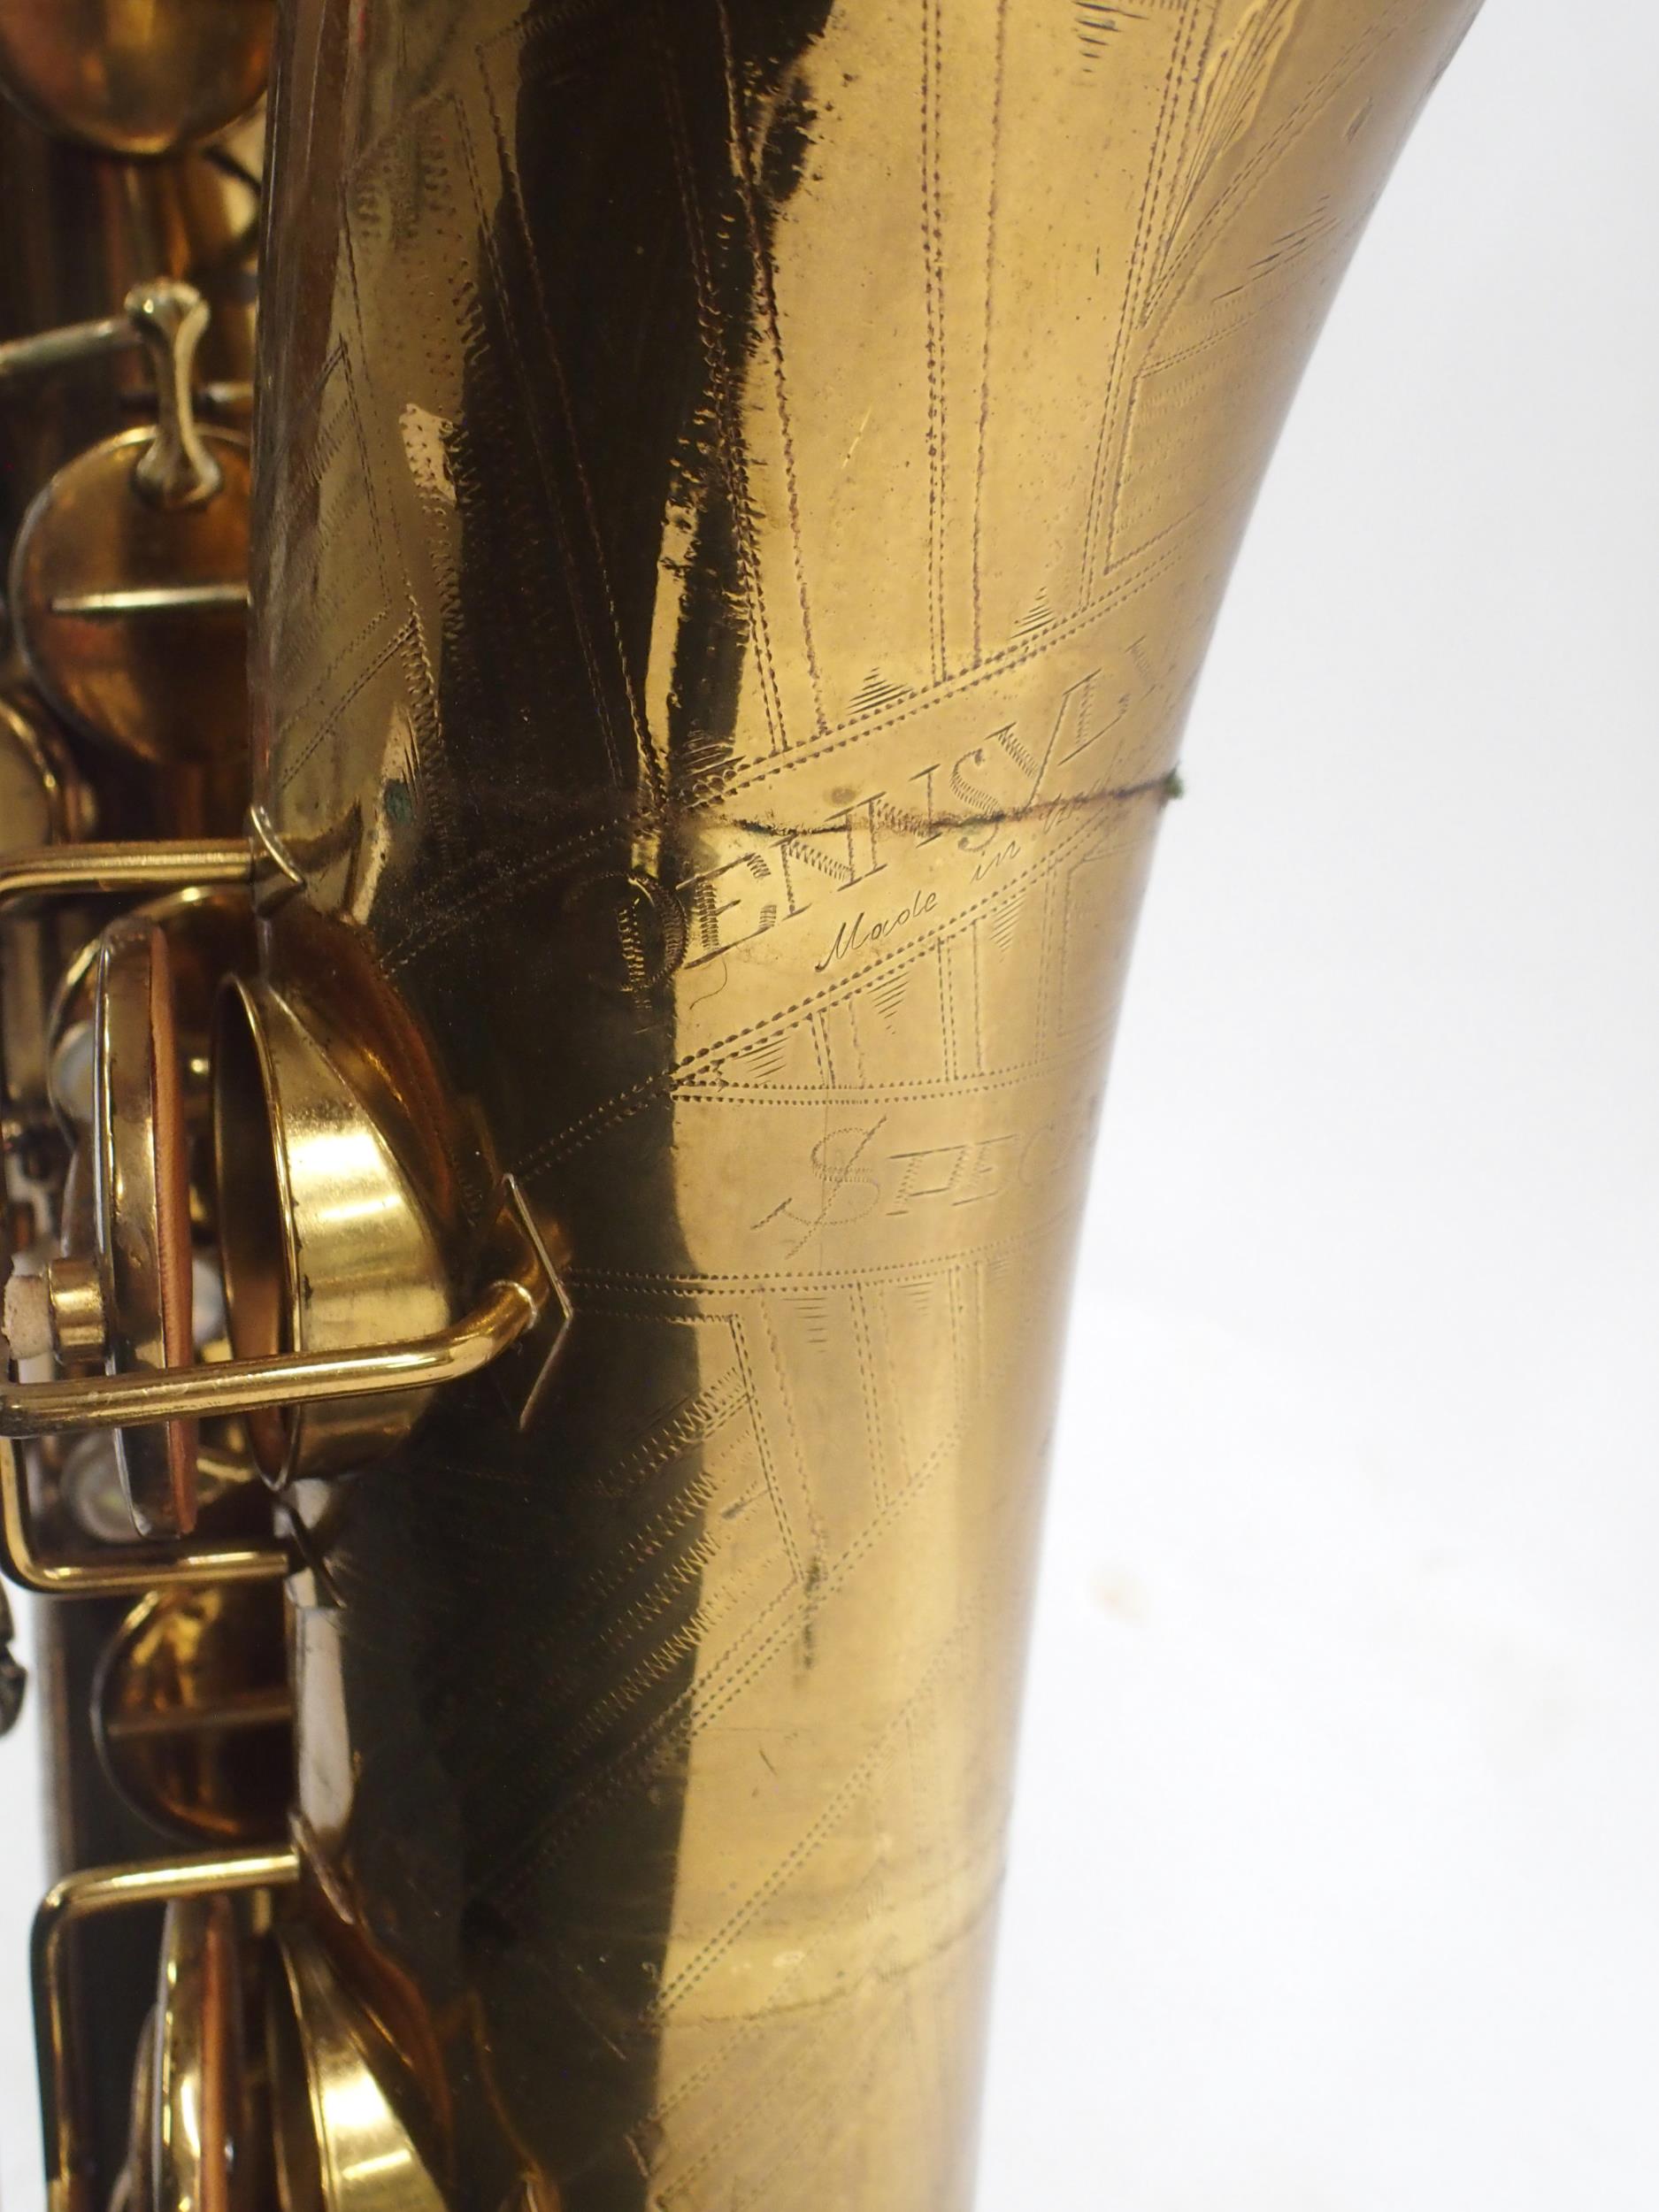 **WITHDRAWN** Pennsylvania Special Baritone Saxophone serial number 261180 engraved "Pensyl - Image 9 of 33